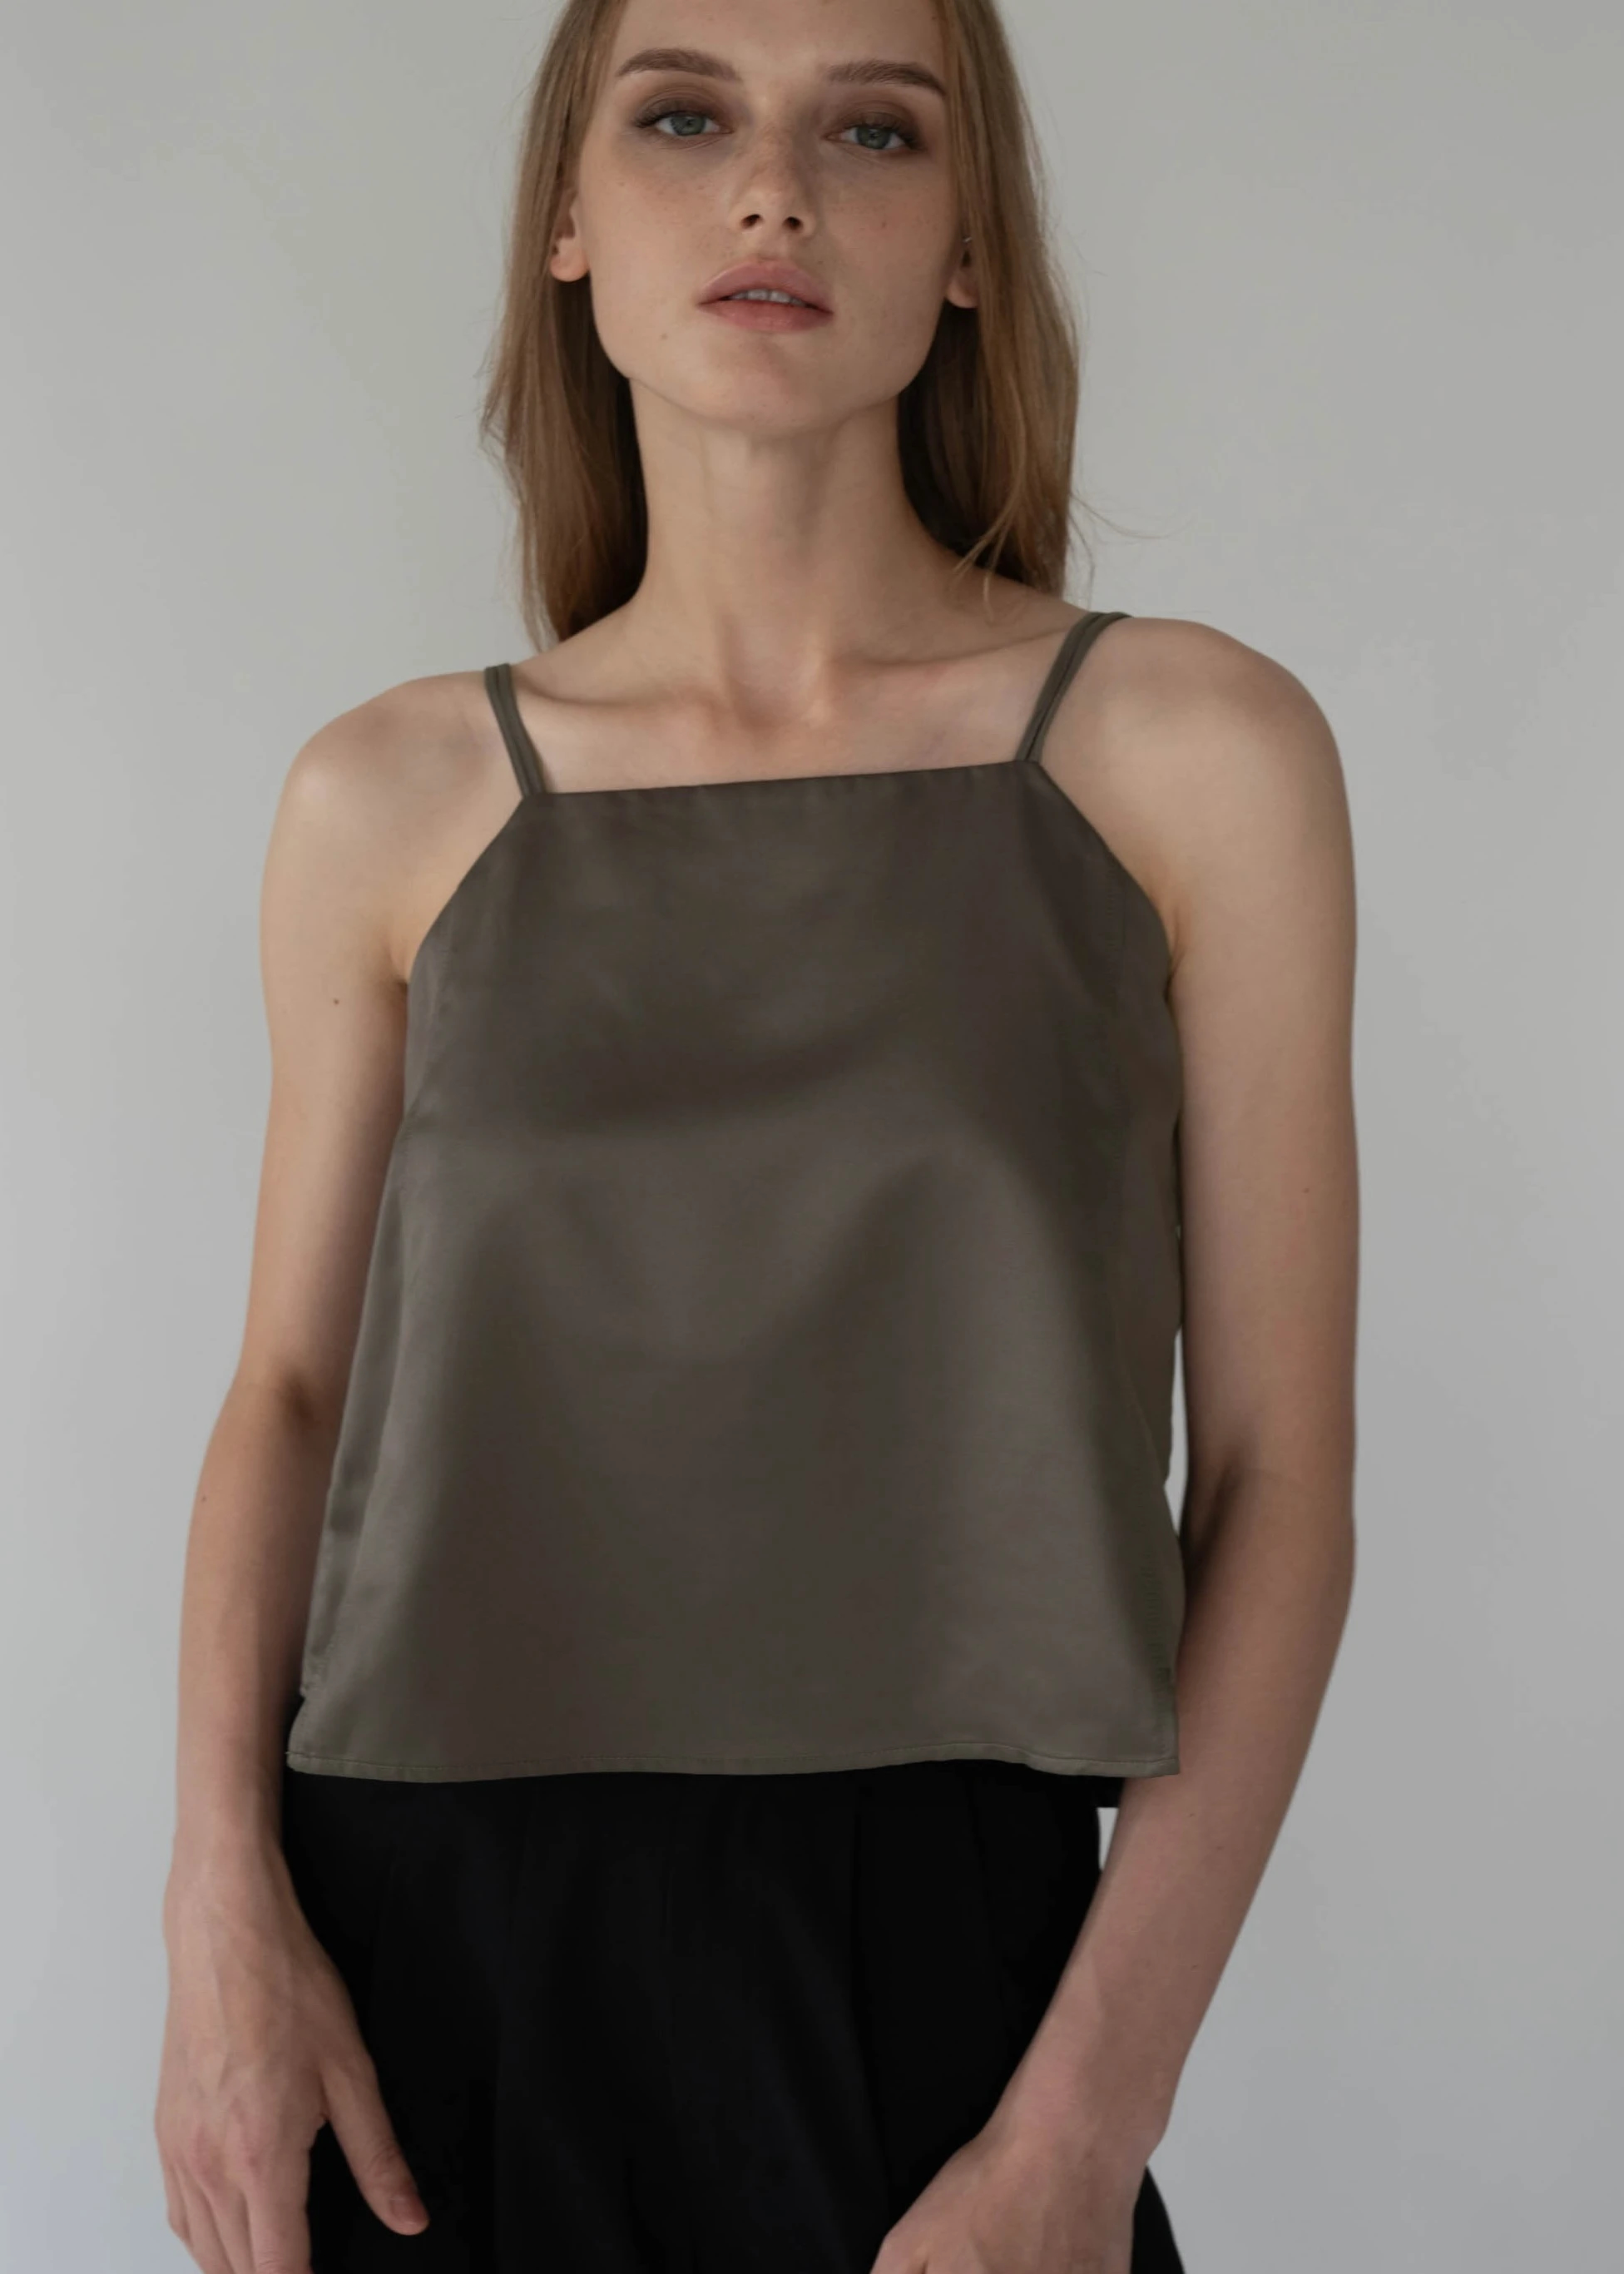 Hammered Satin Top Camisole Shiny